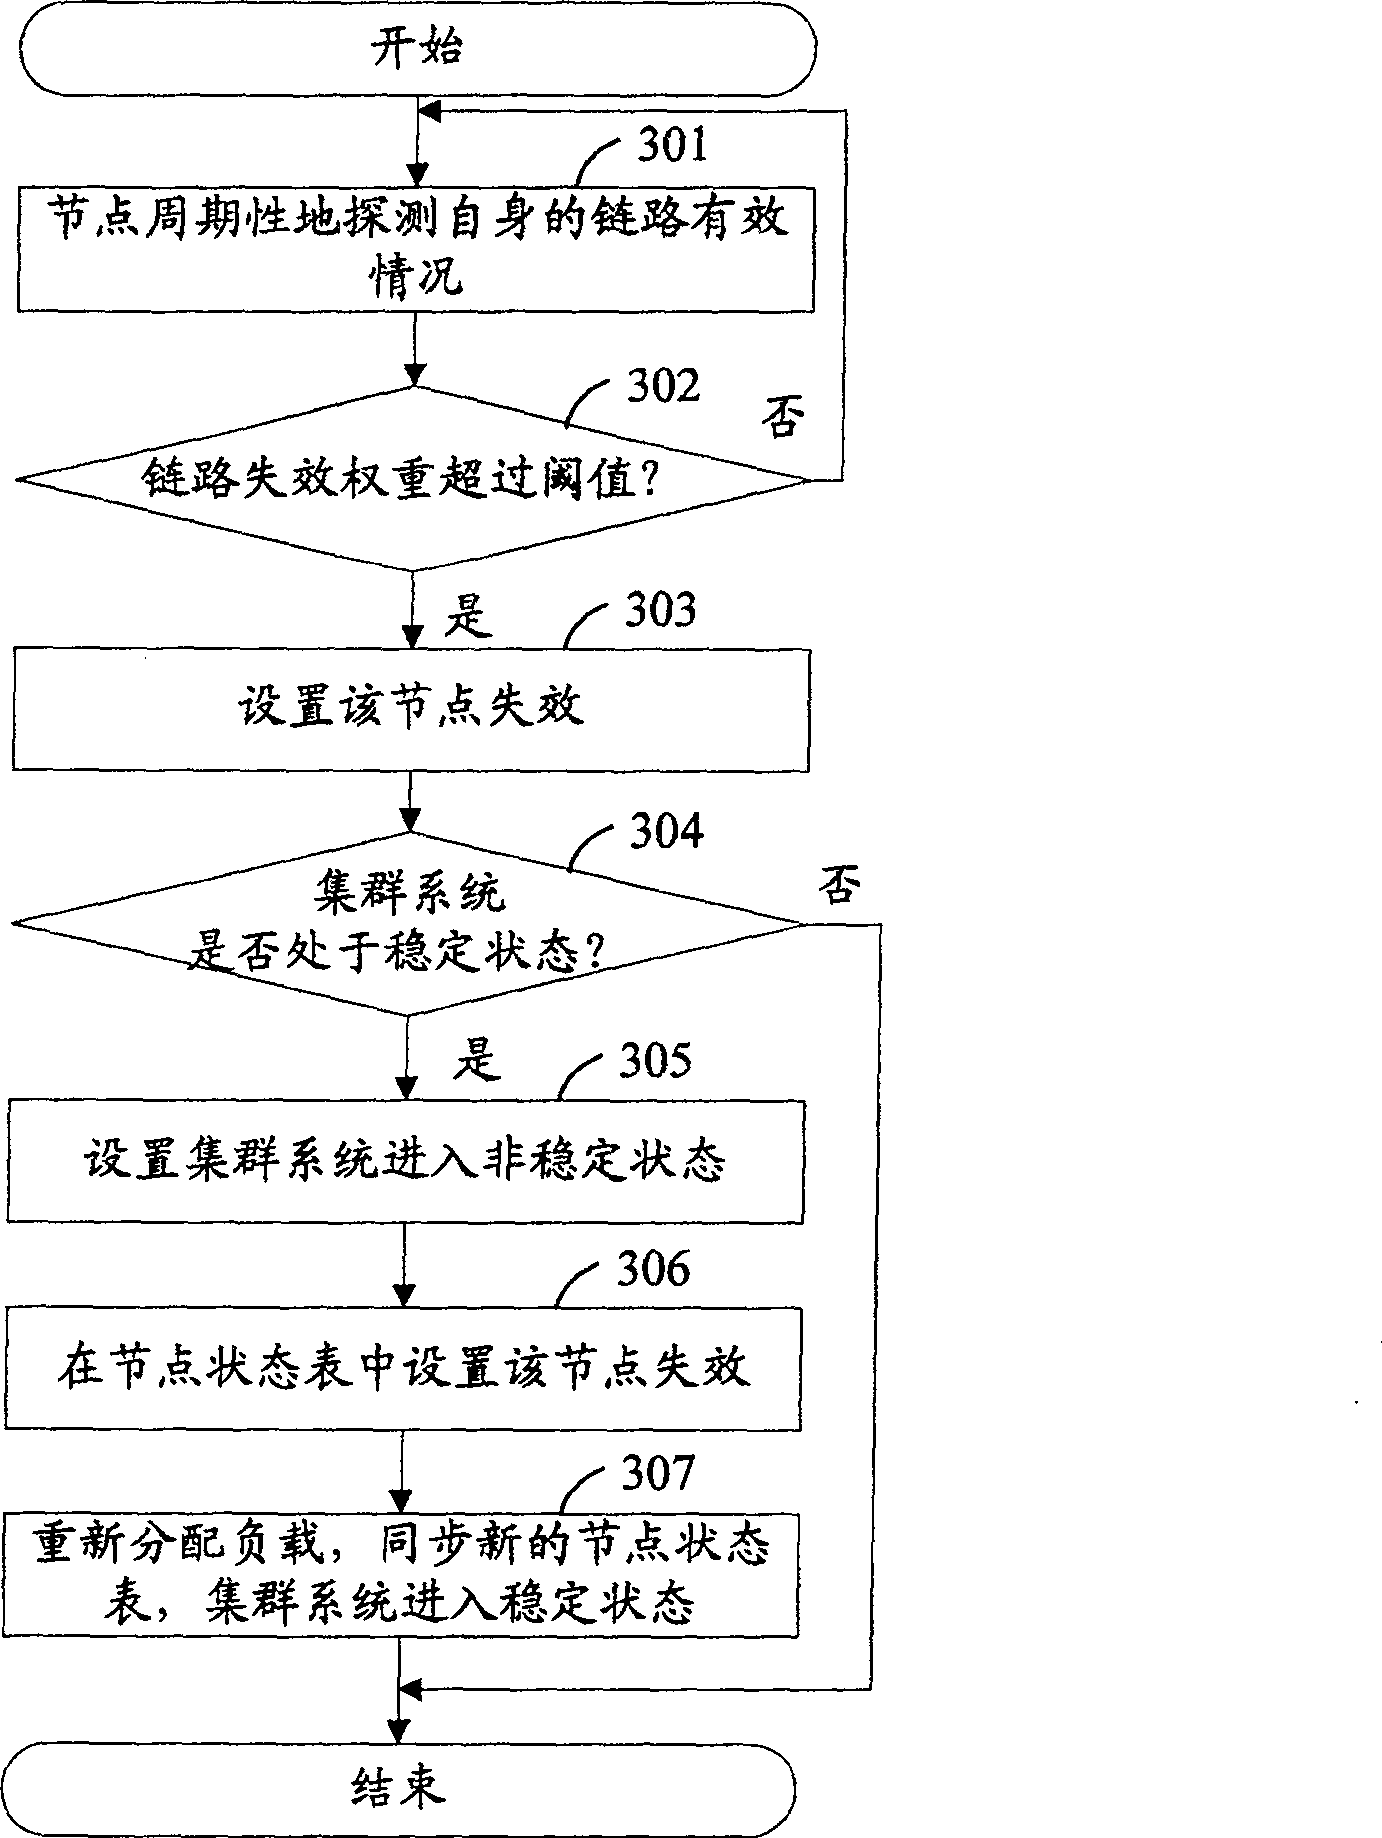 Method for realizing high-usability of network security equipment under cluster mode